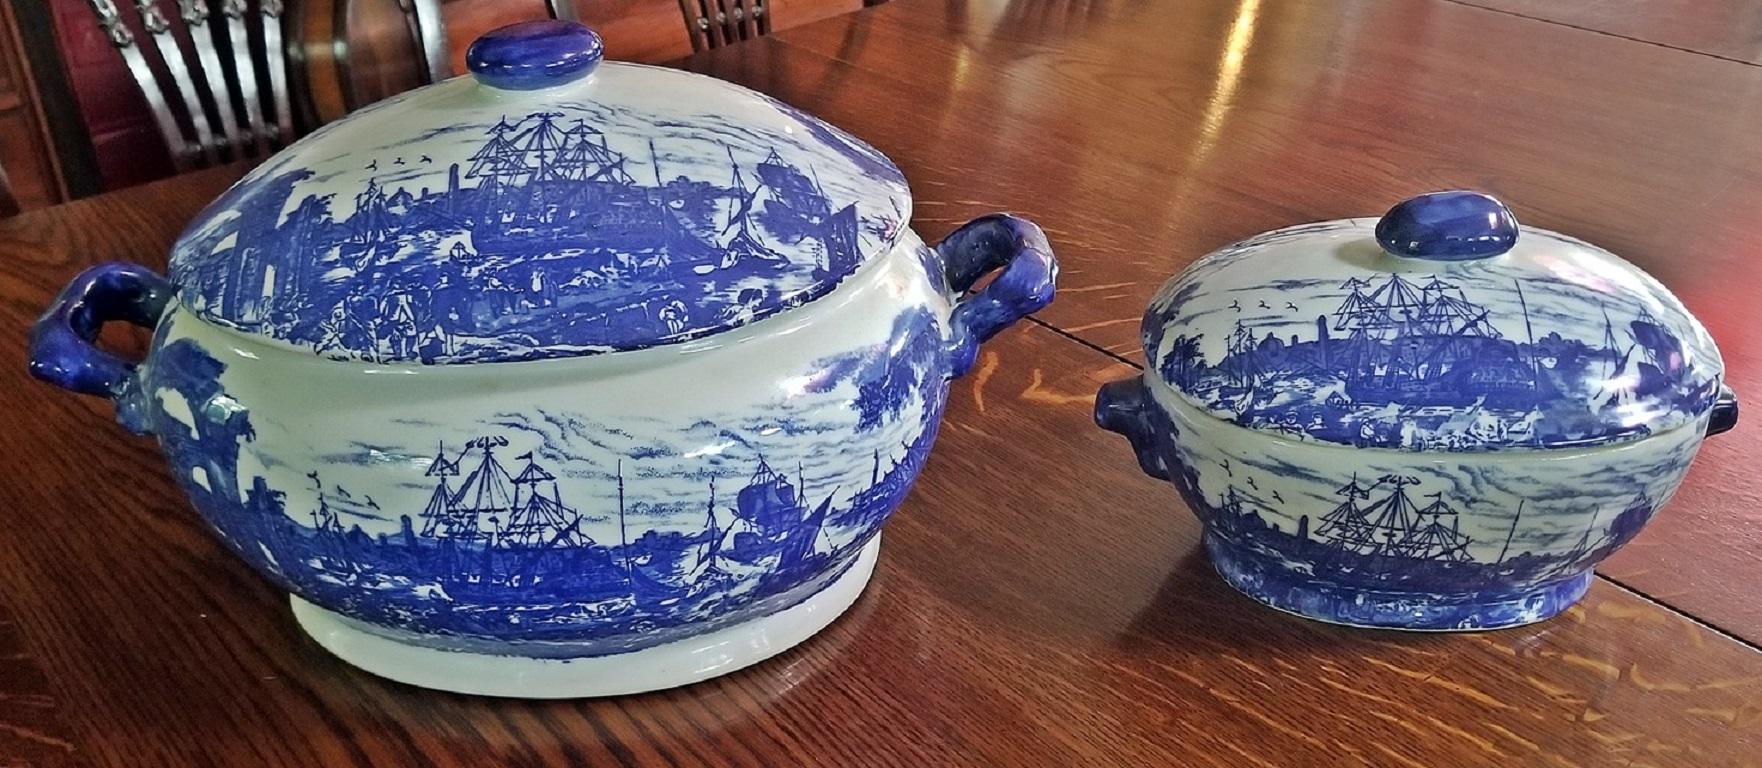 High Victorian Victoria Ware Ironstone Lidded Tureens of Shipping Scenes